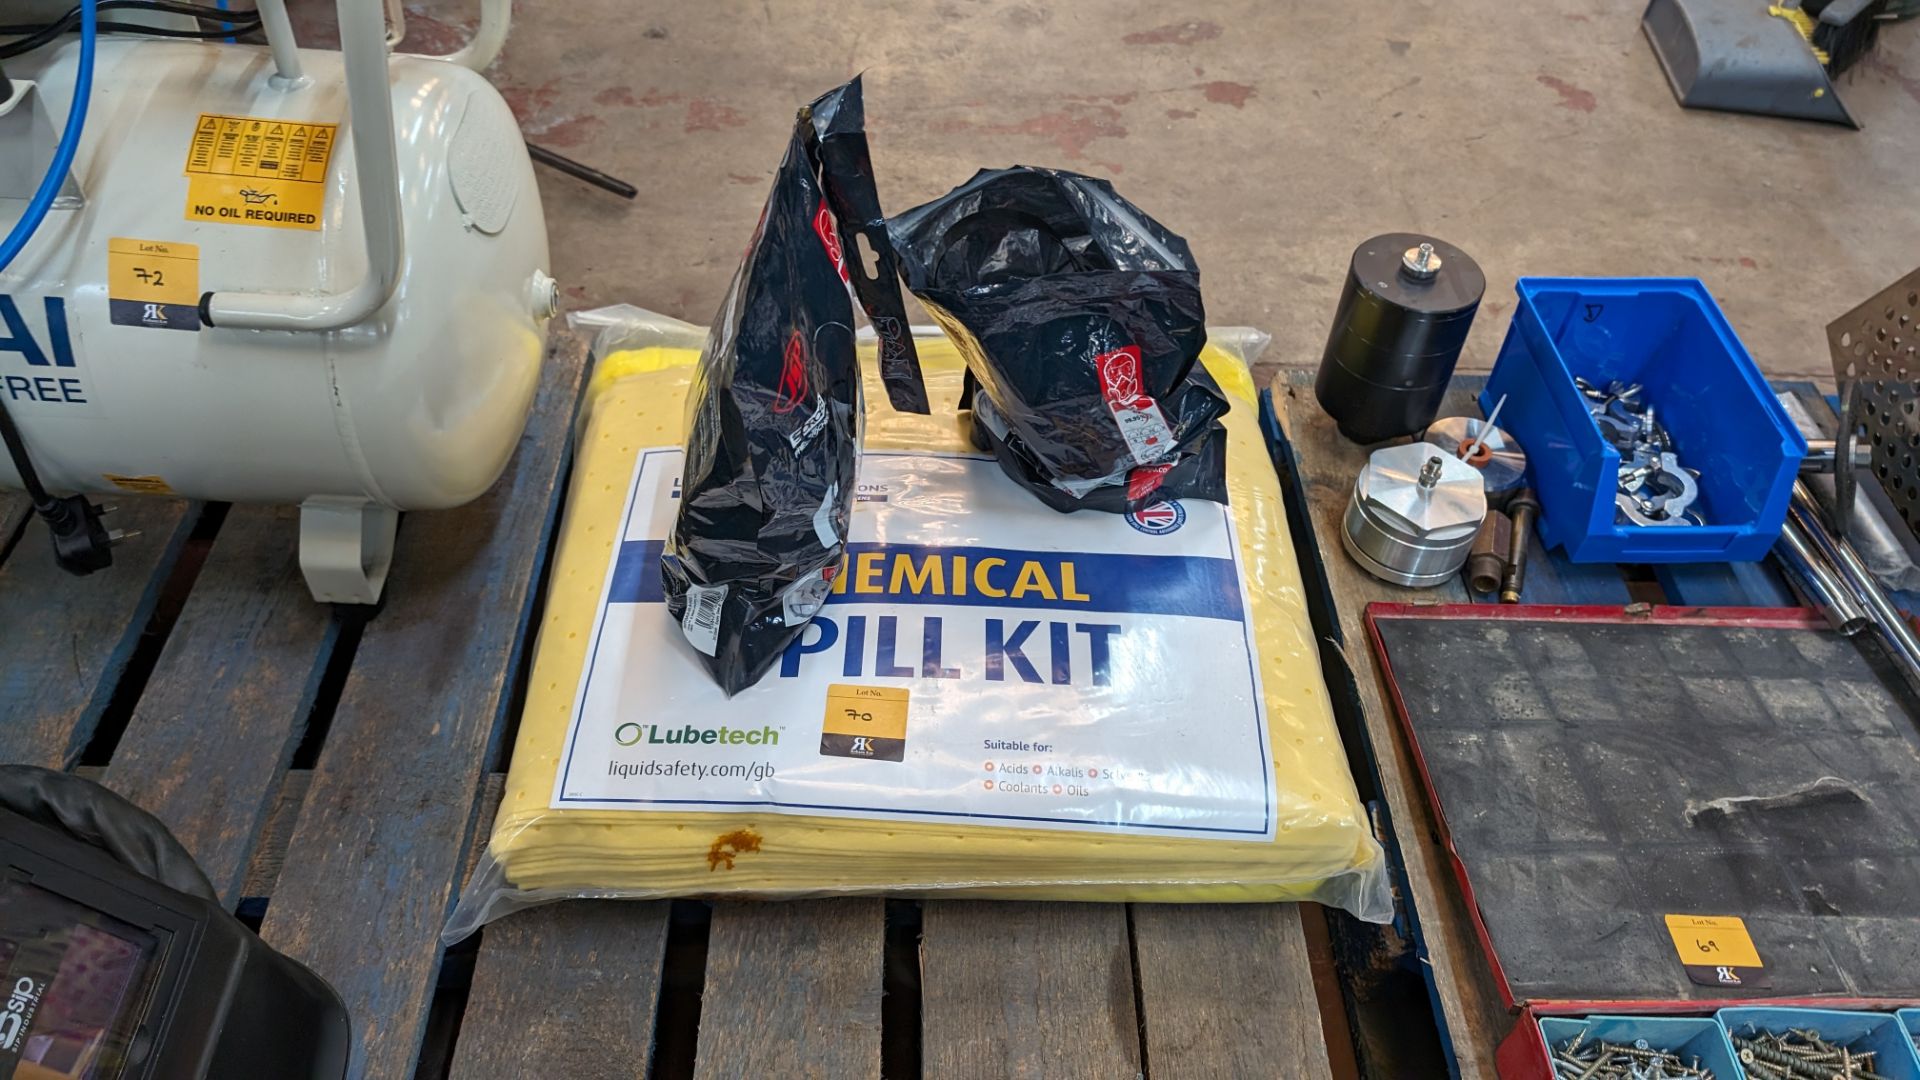 Chemical spill kit plus 2 off respirator devices